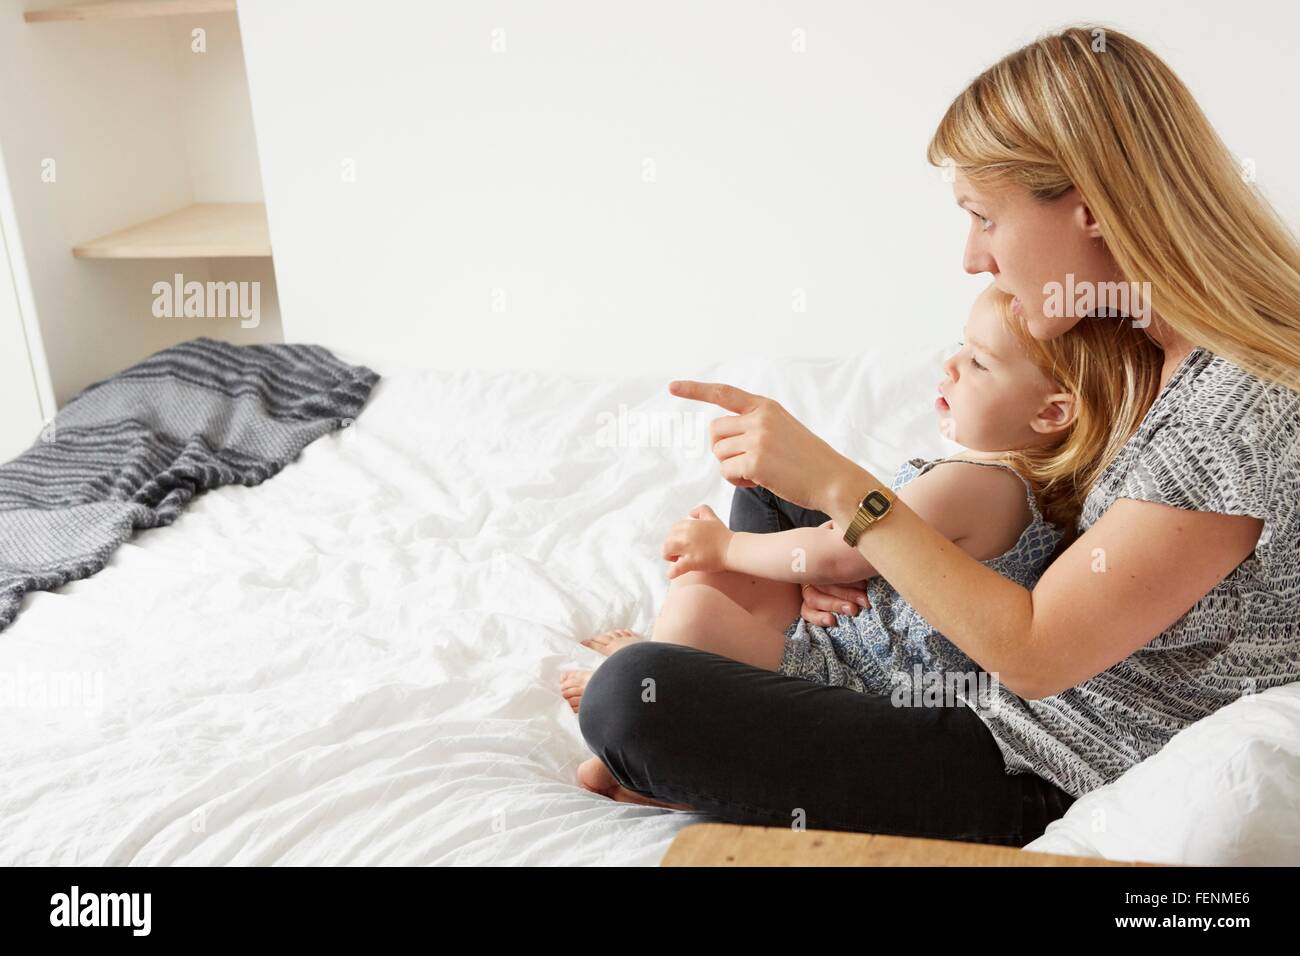 Mid adult woman sitting with toddler daughter on bed Stock Photo